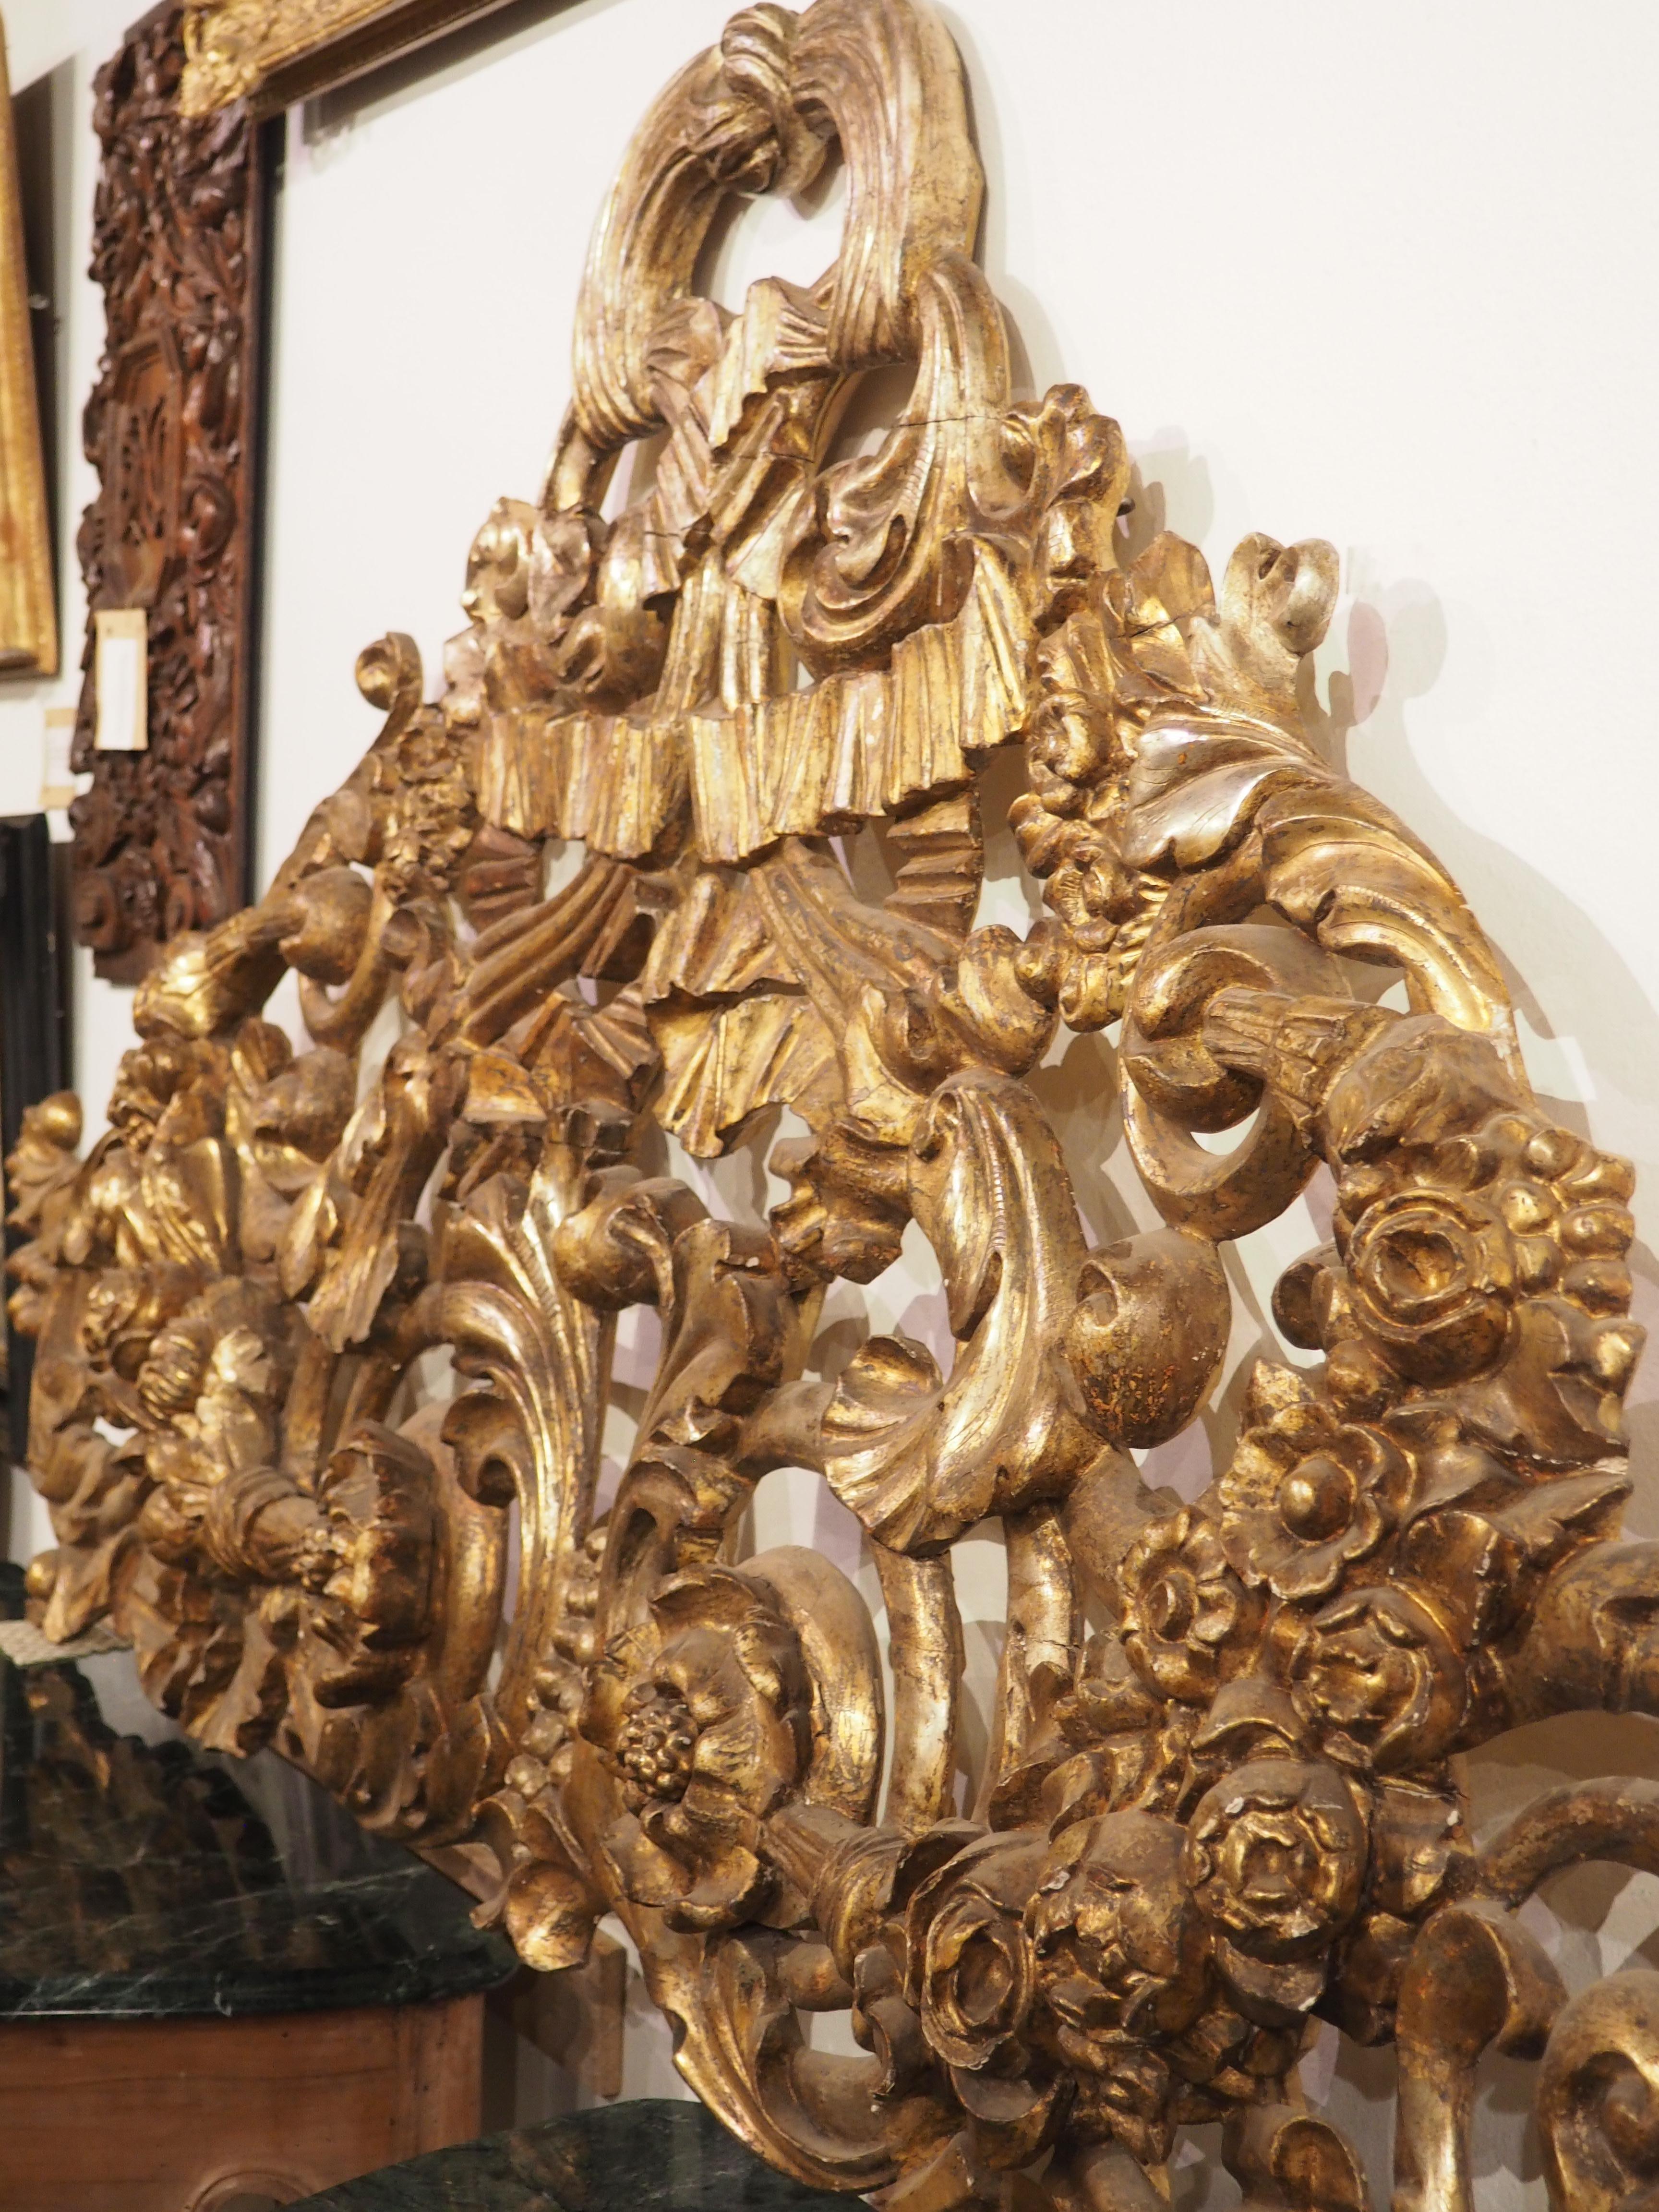 Large Circa 1850 Italian Giltwood Architectural Carving or Headboard 91.5 Inches For Sale 8